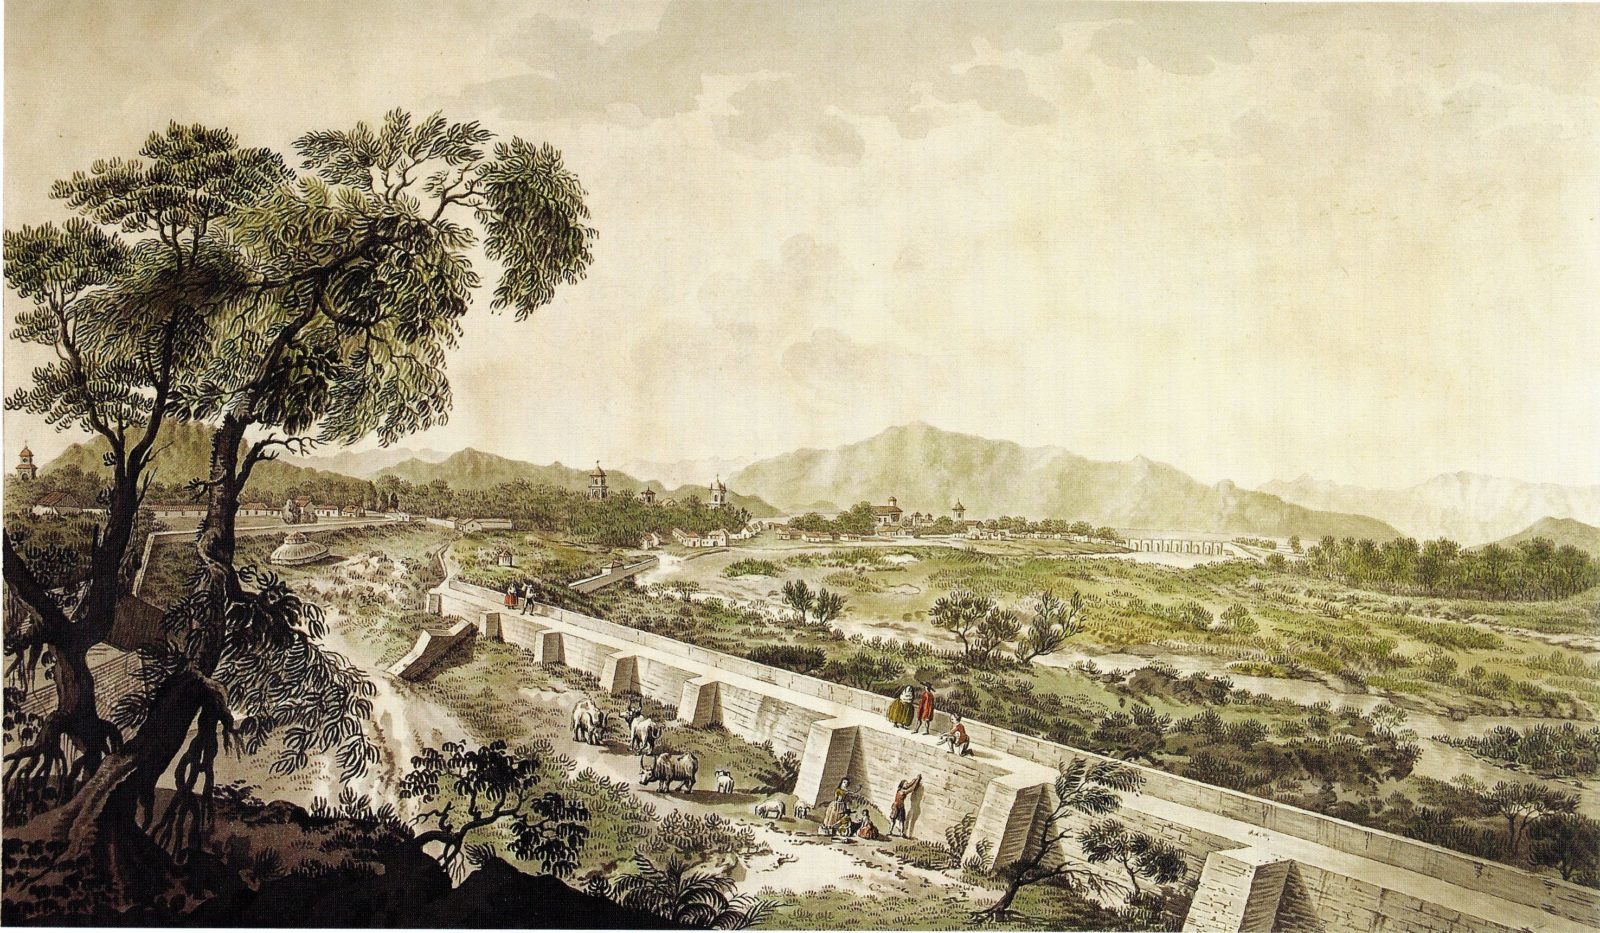 At 1794 Etching of a view of a wall and mountains in Santiago de Chile